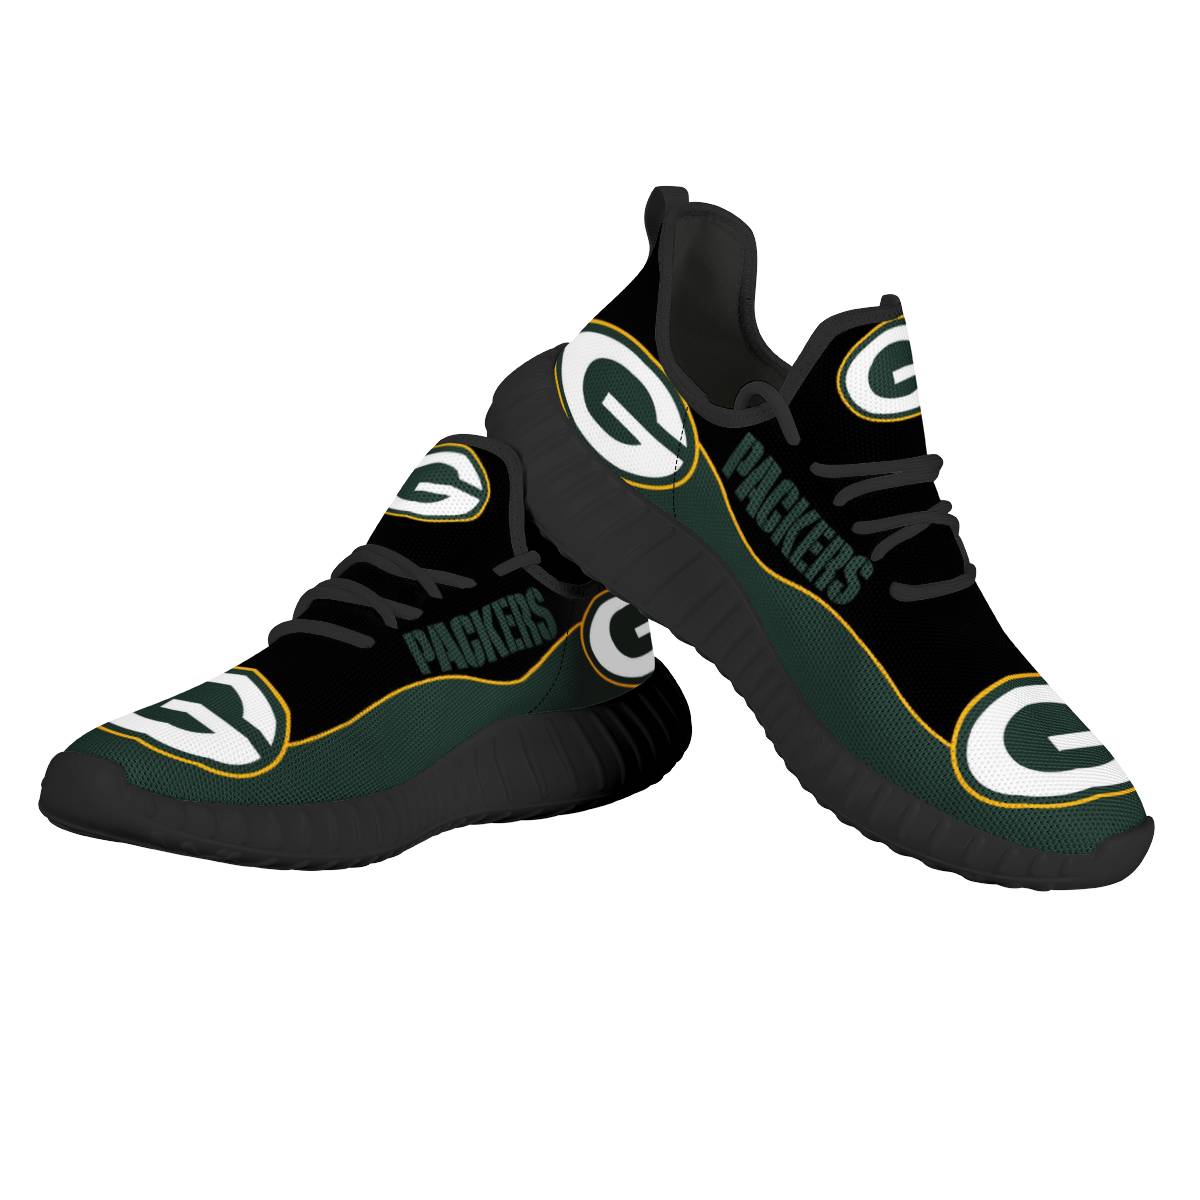 Men's NFL Green Bay Packers Mesh Knit Sneakers/Shoes 003